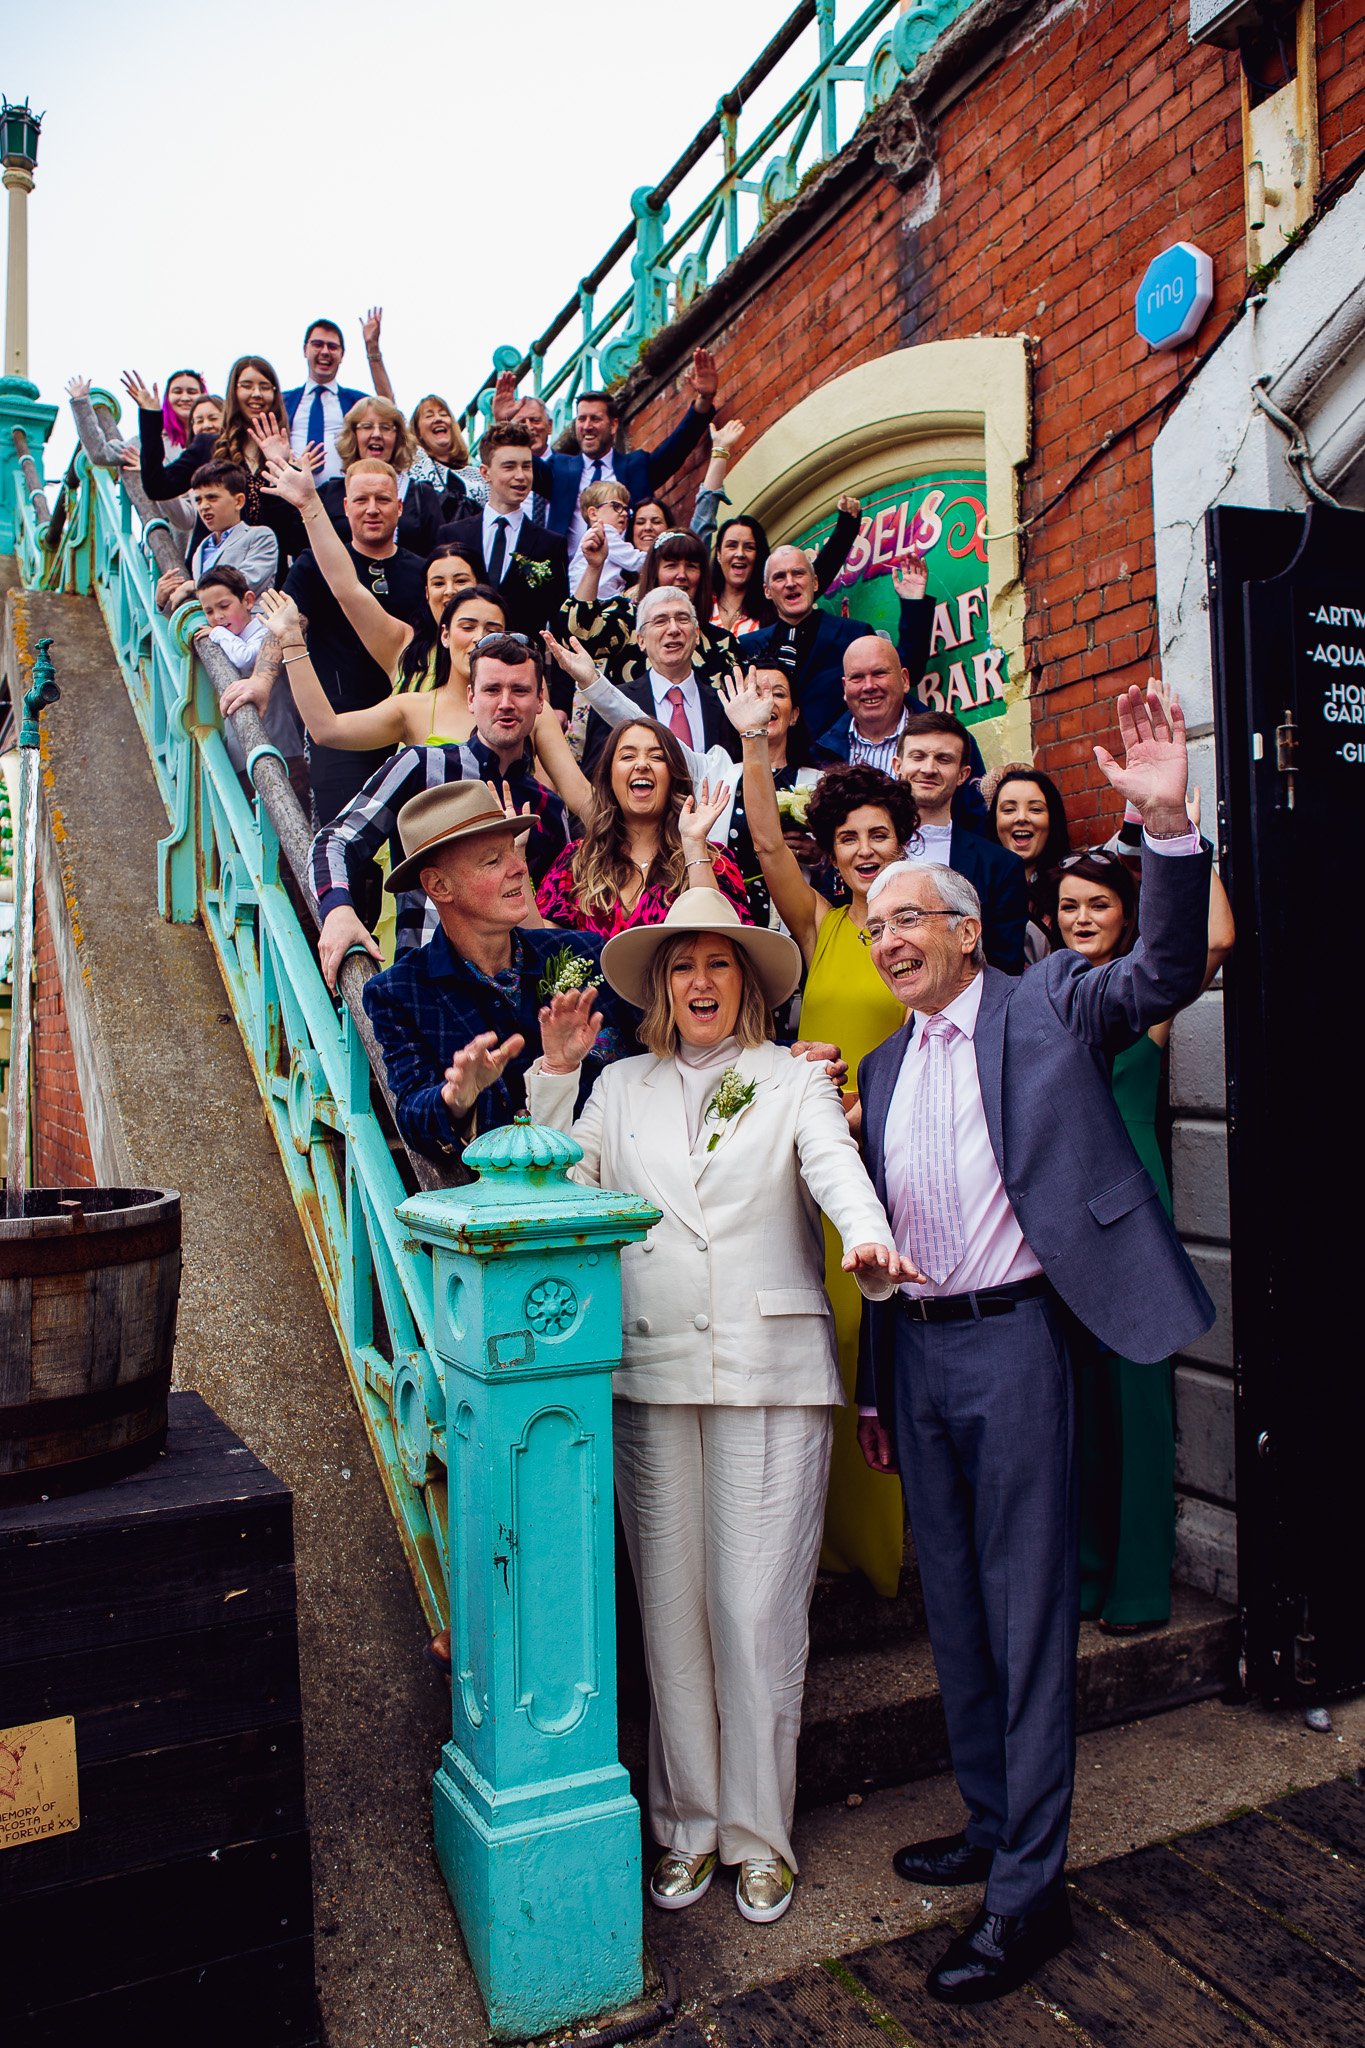 Mary, Mike and all their wedding guests pose for the wedding group shot on the stairs down to Brighton beach.